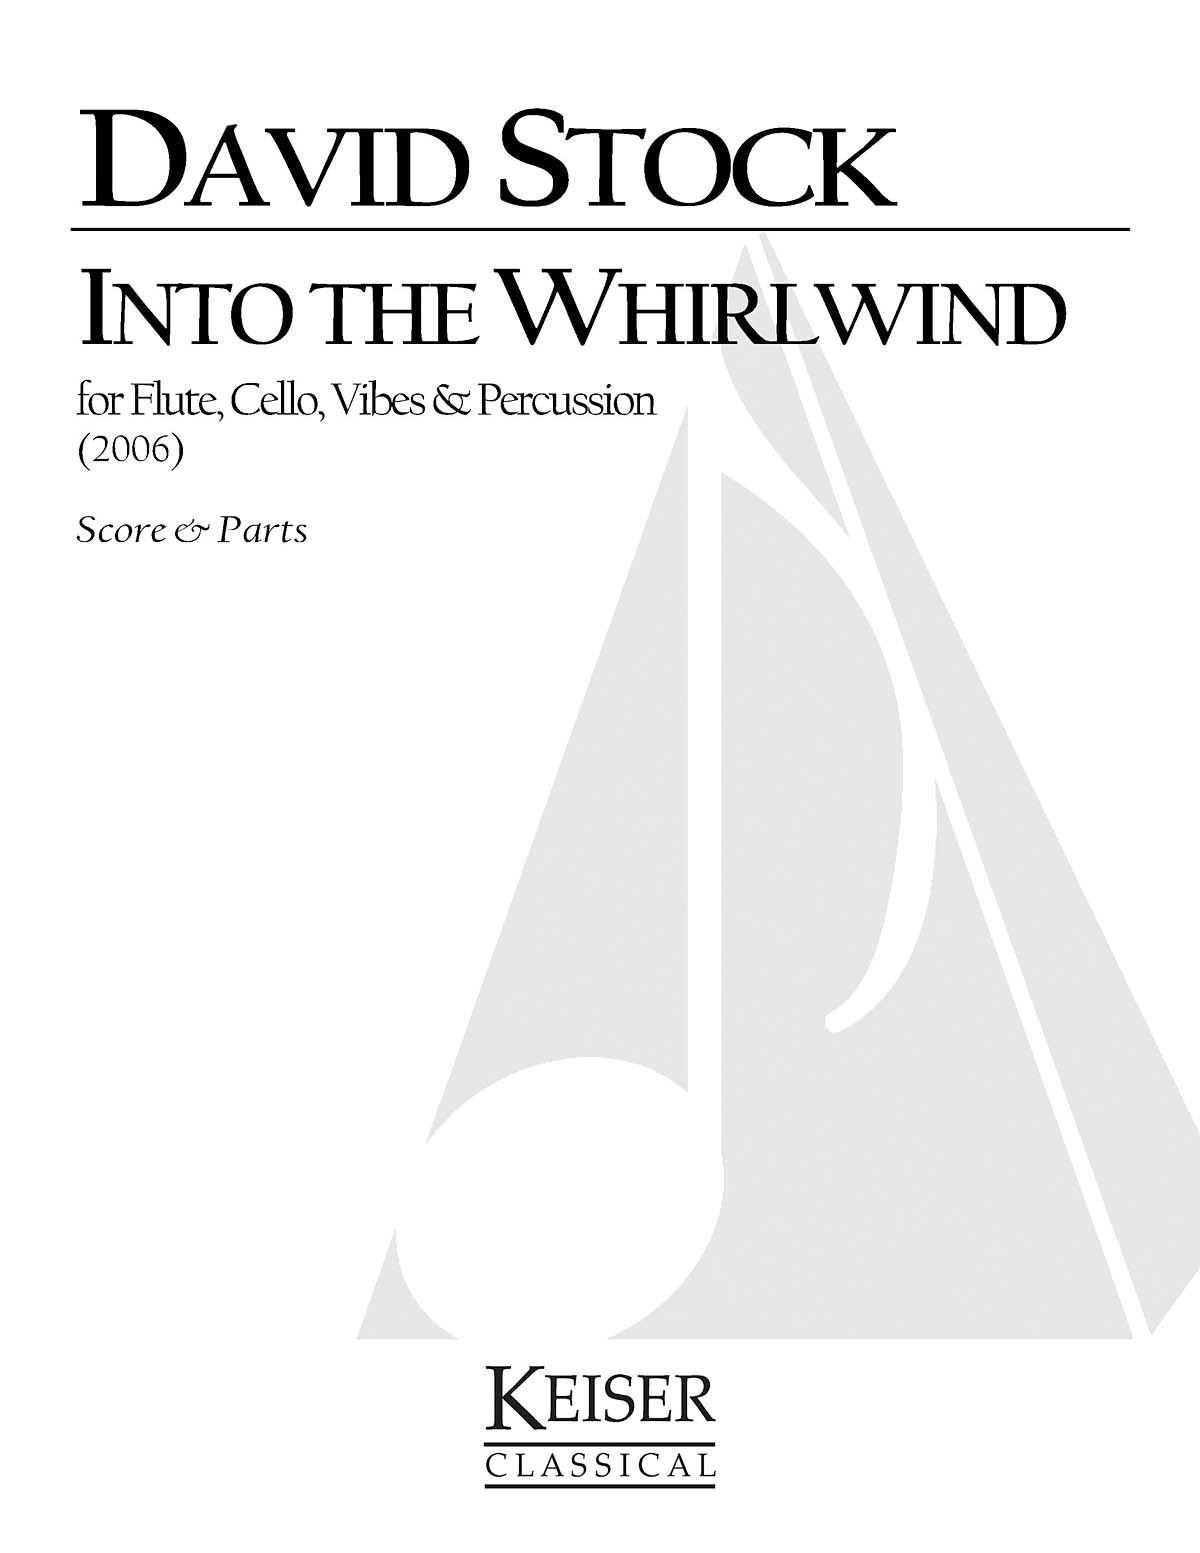 Into the Whirlwind(for Flute, Cello, Vibes and Percussion)